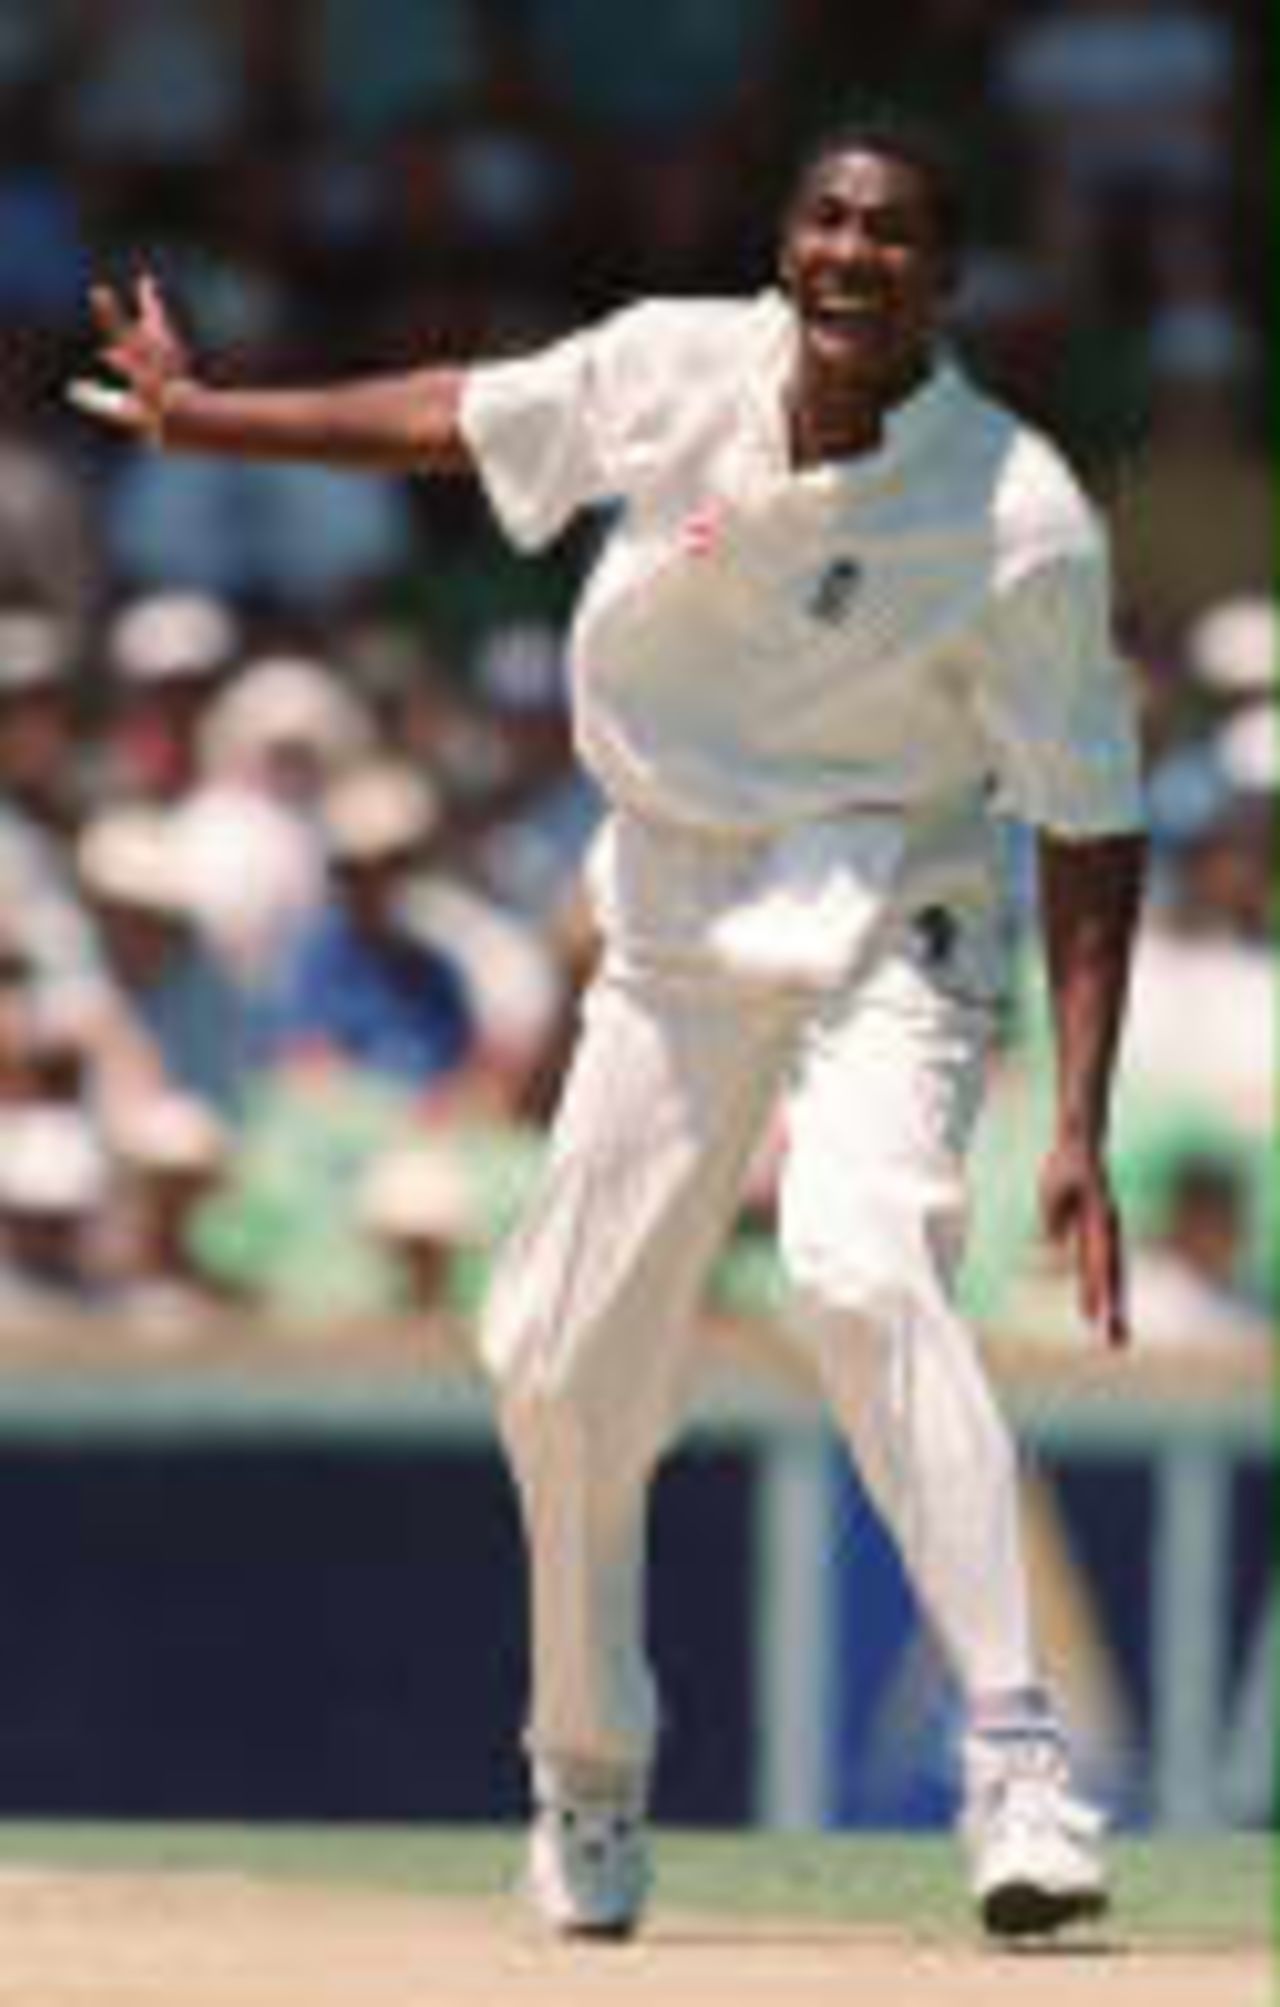 Tudor appeals for an lbw The Ashes, 1998/99, 2nd Test Australia v England WACA Ground, Perth 28,29,30 November 1998